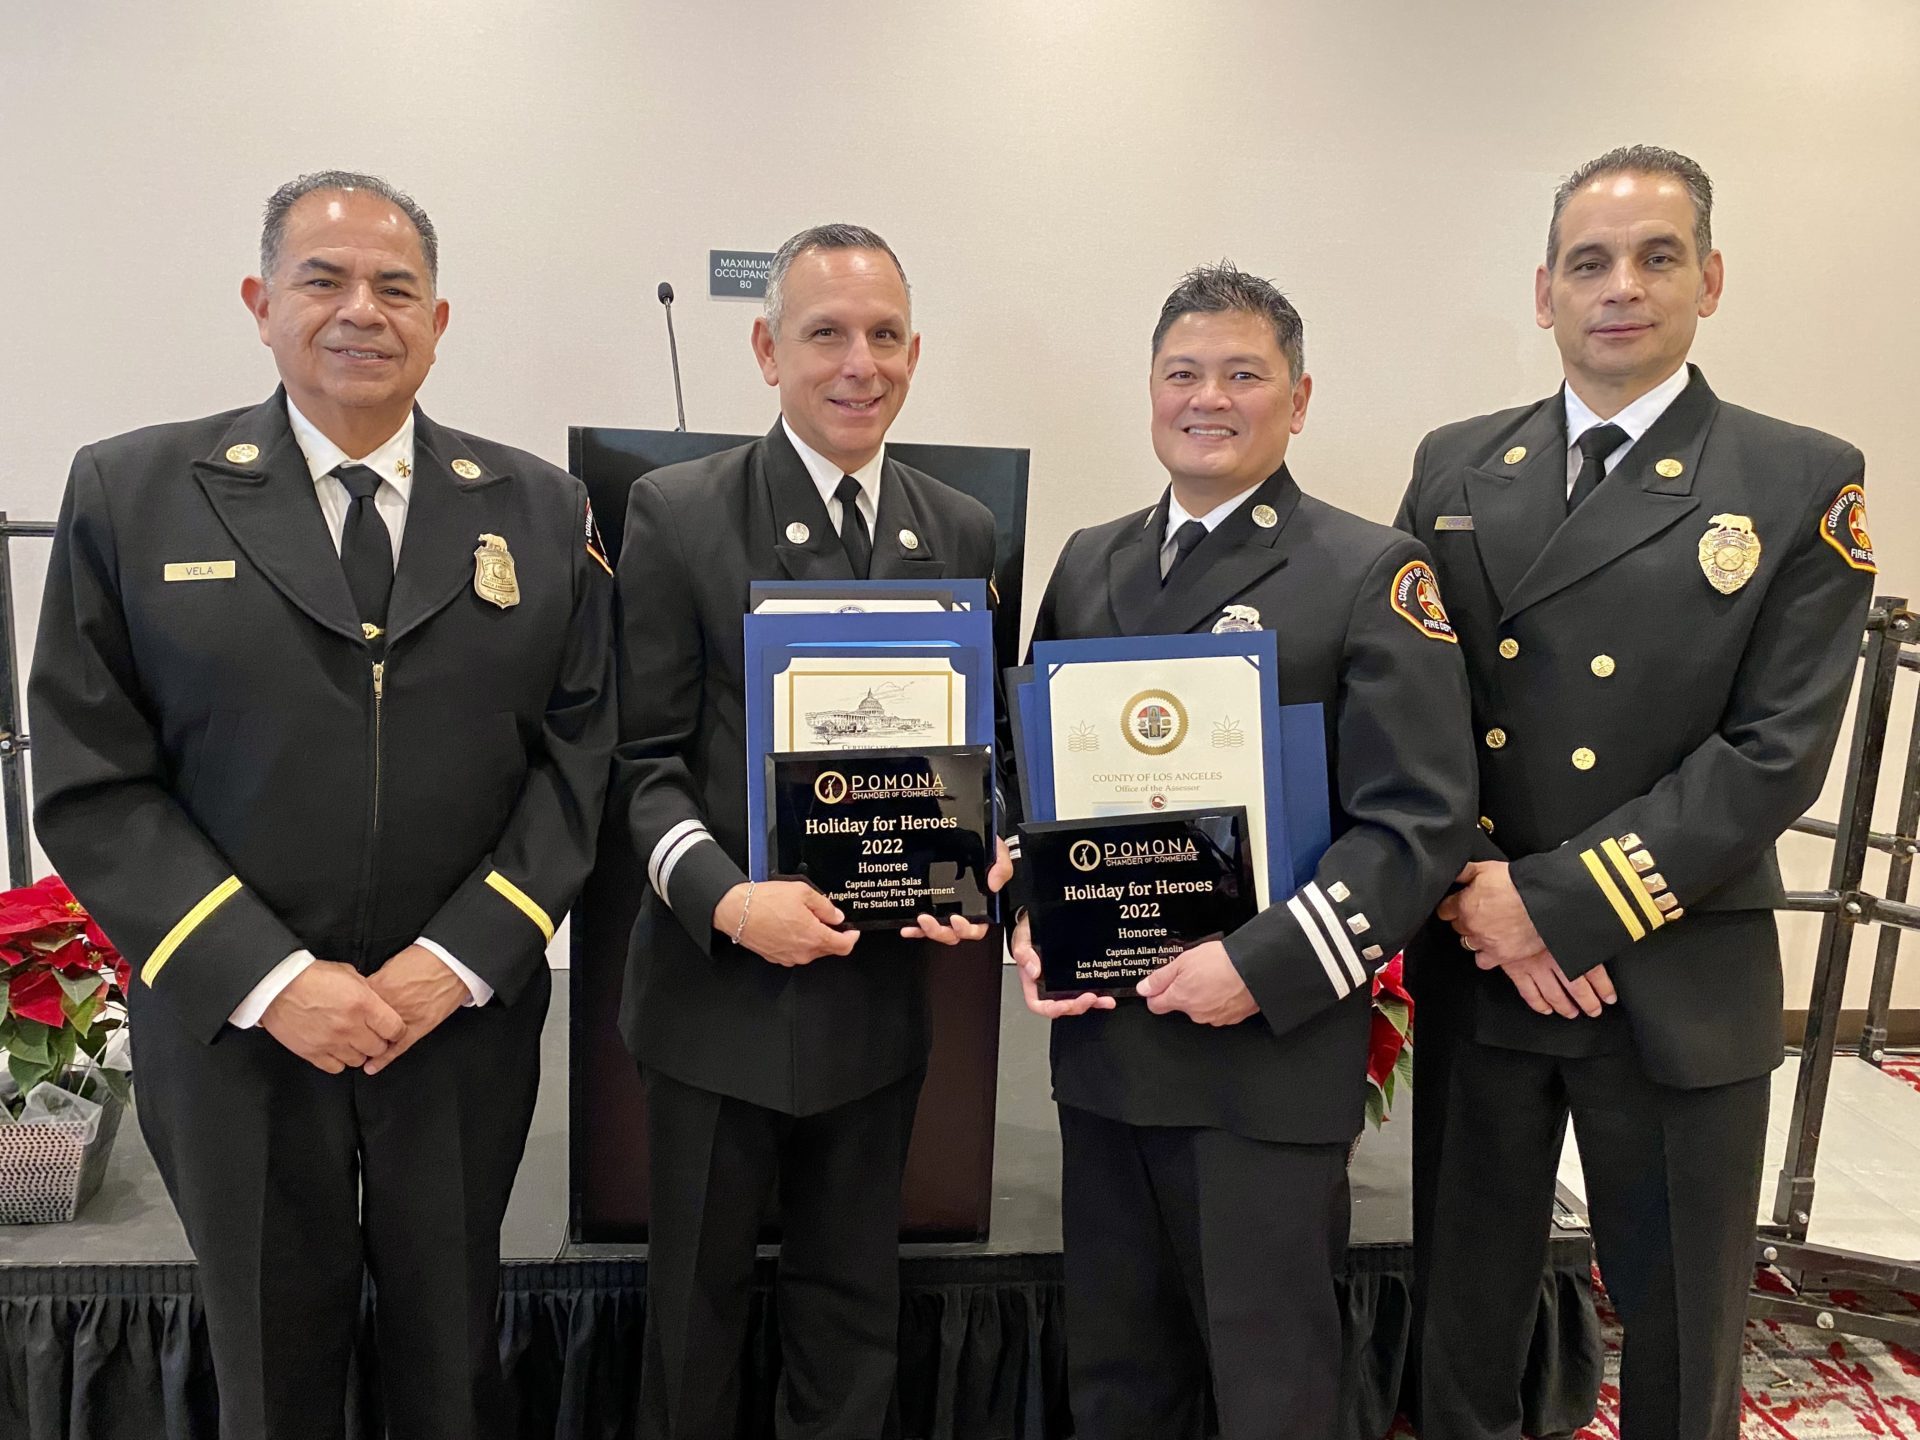 Pomona Hosts Holiday Luncheon 2022 to Honor First Responders